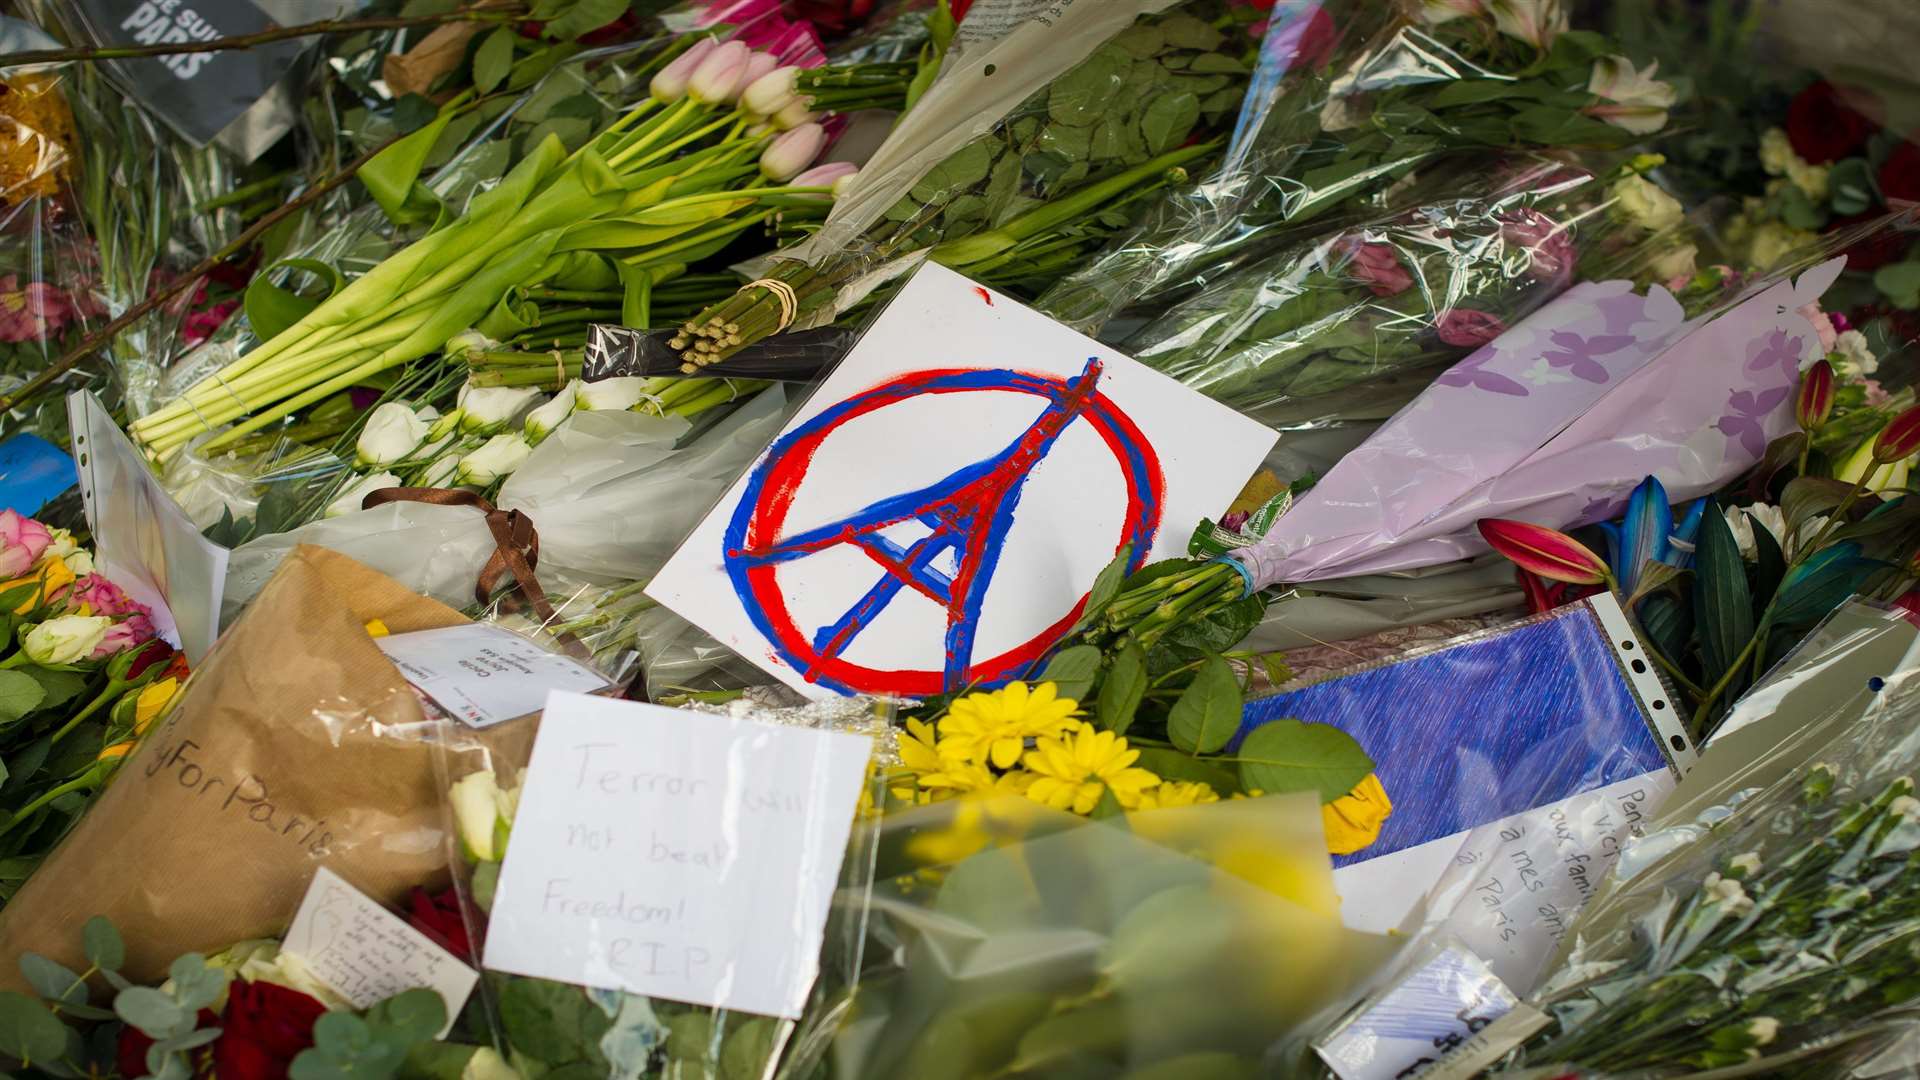 Floral tributes left outside the French Embassy in Knightsbridge, London. Picture: PA Wire/PA Images/Dominic Lipinski